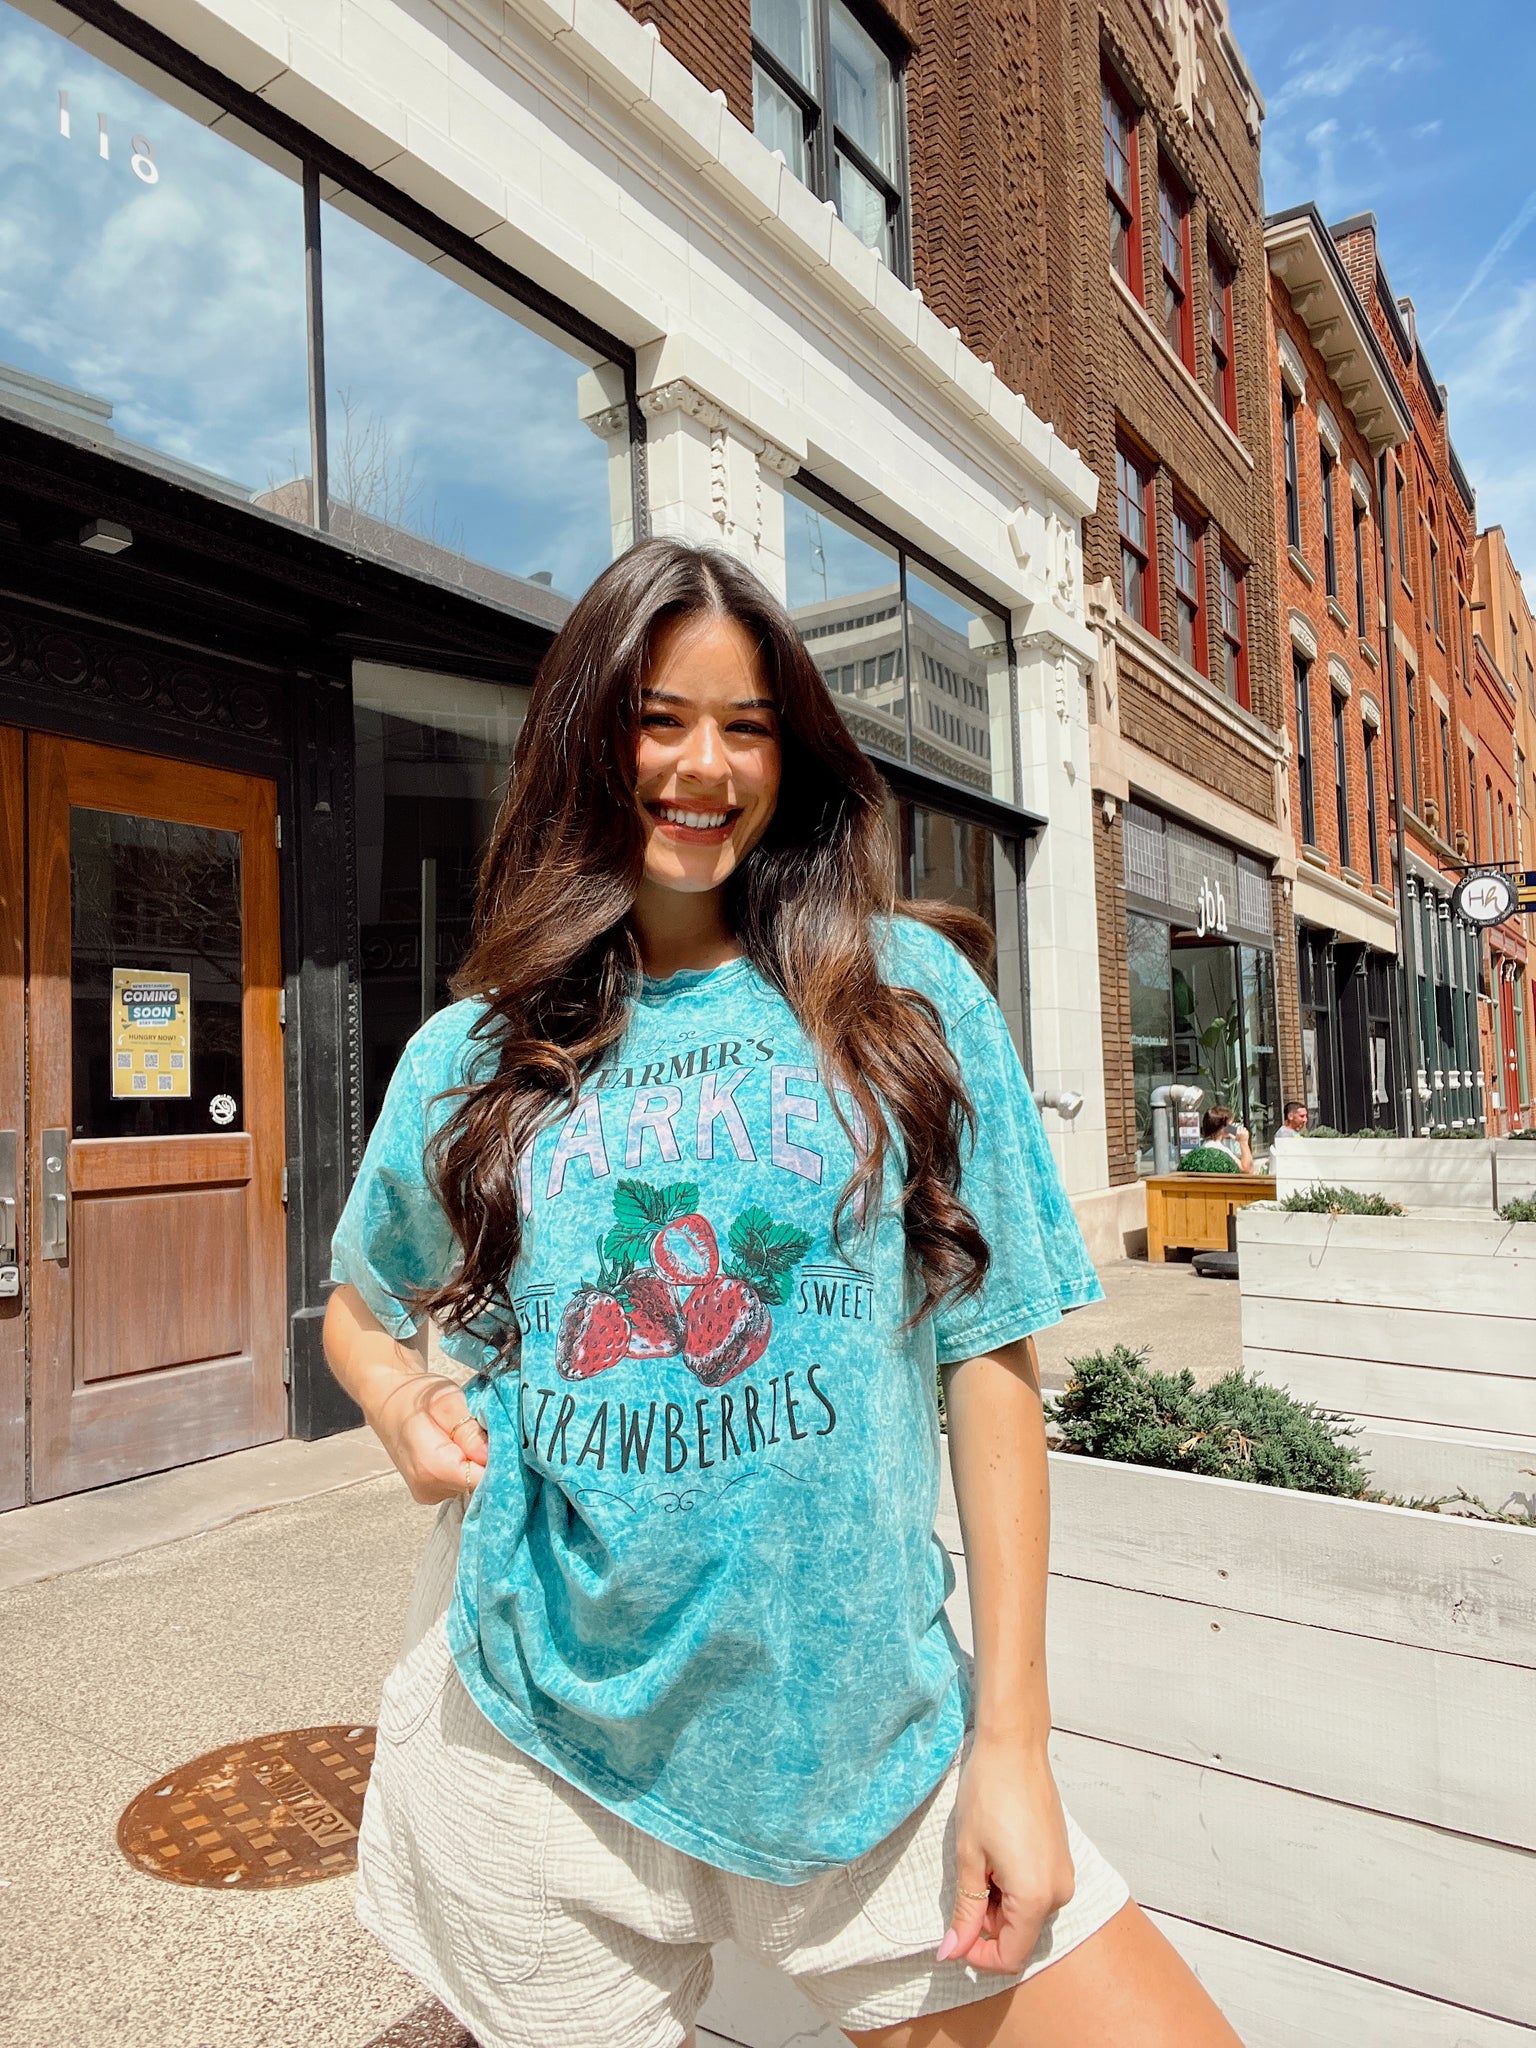 Farmers Market Washed Teal Graphic Tee